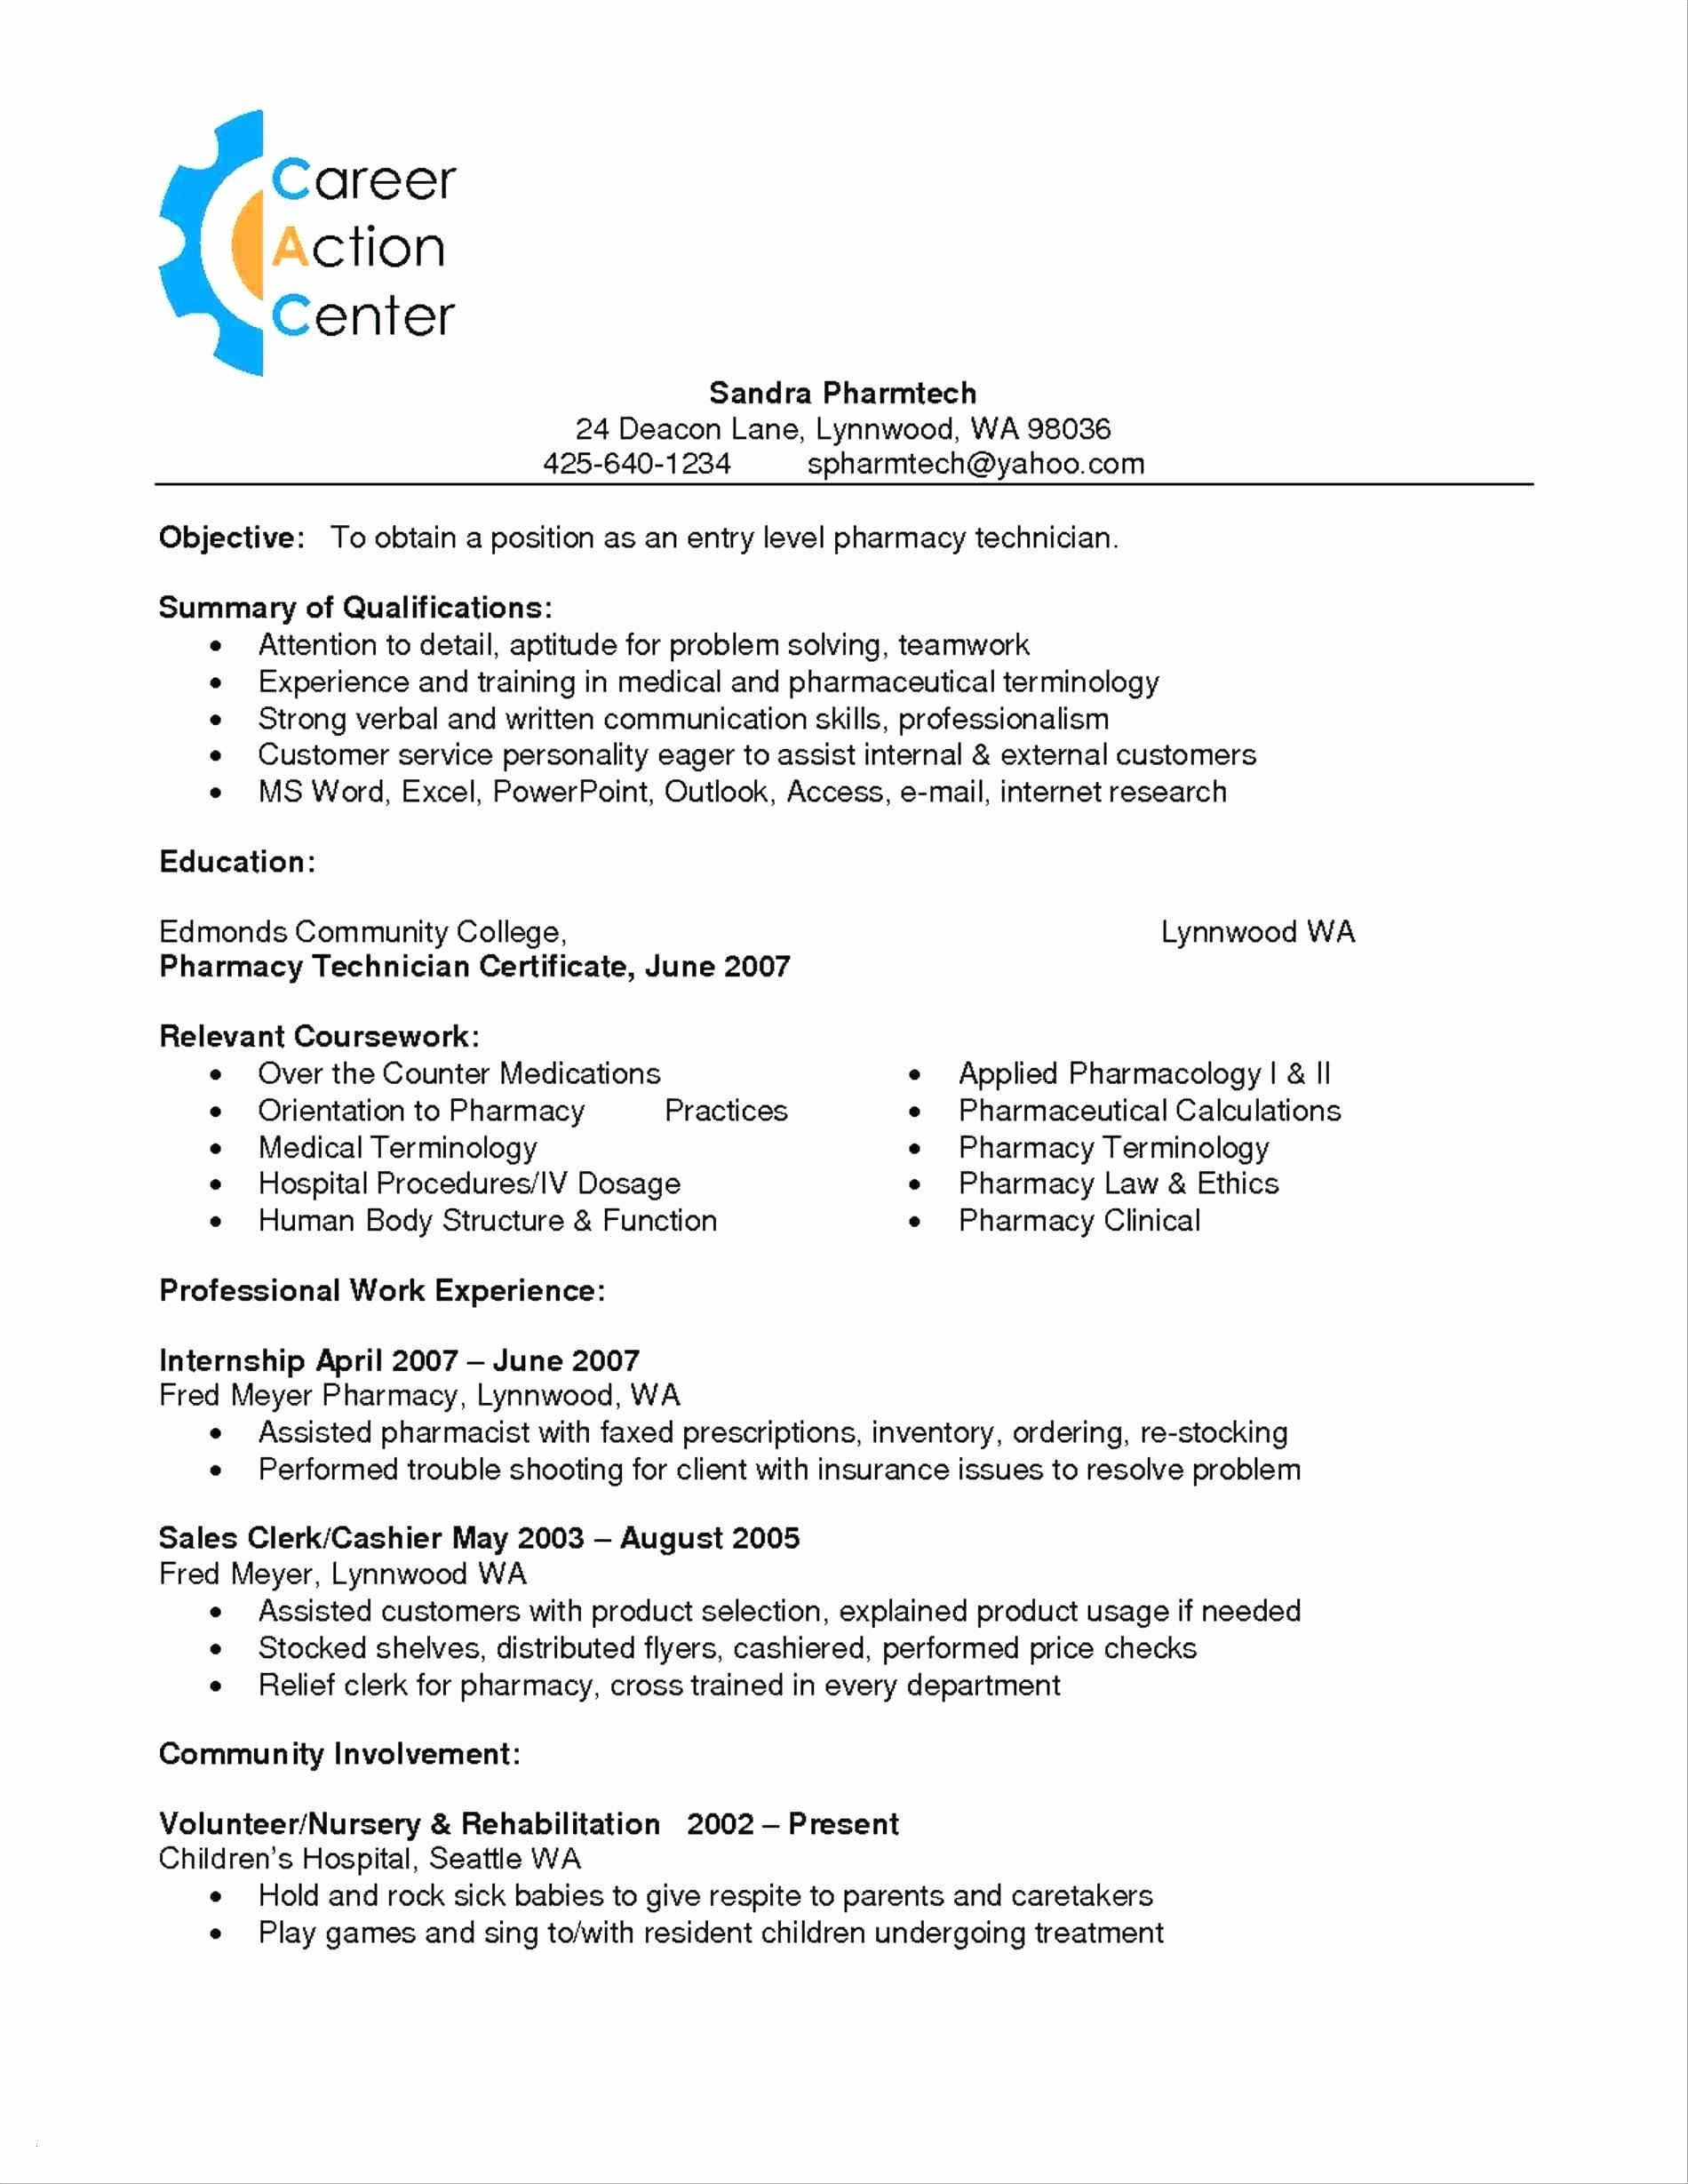 32 Unique Related Coursework Resume in 2020